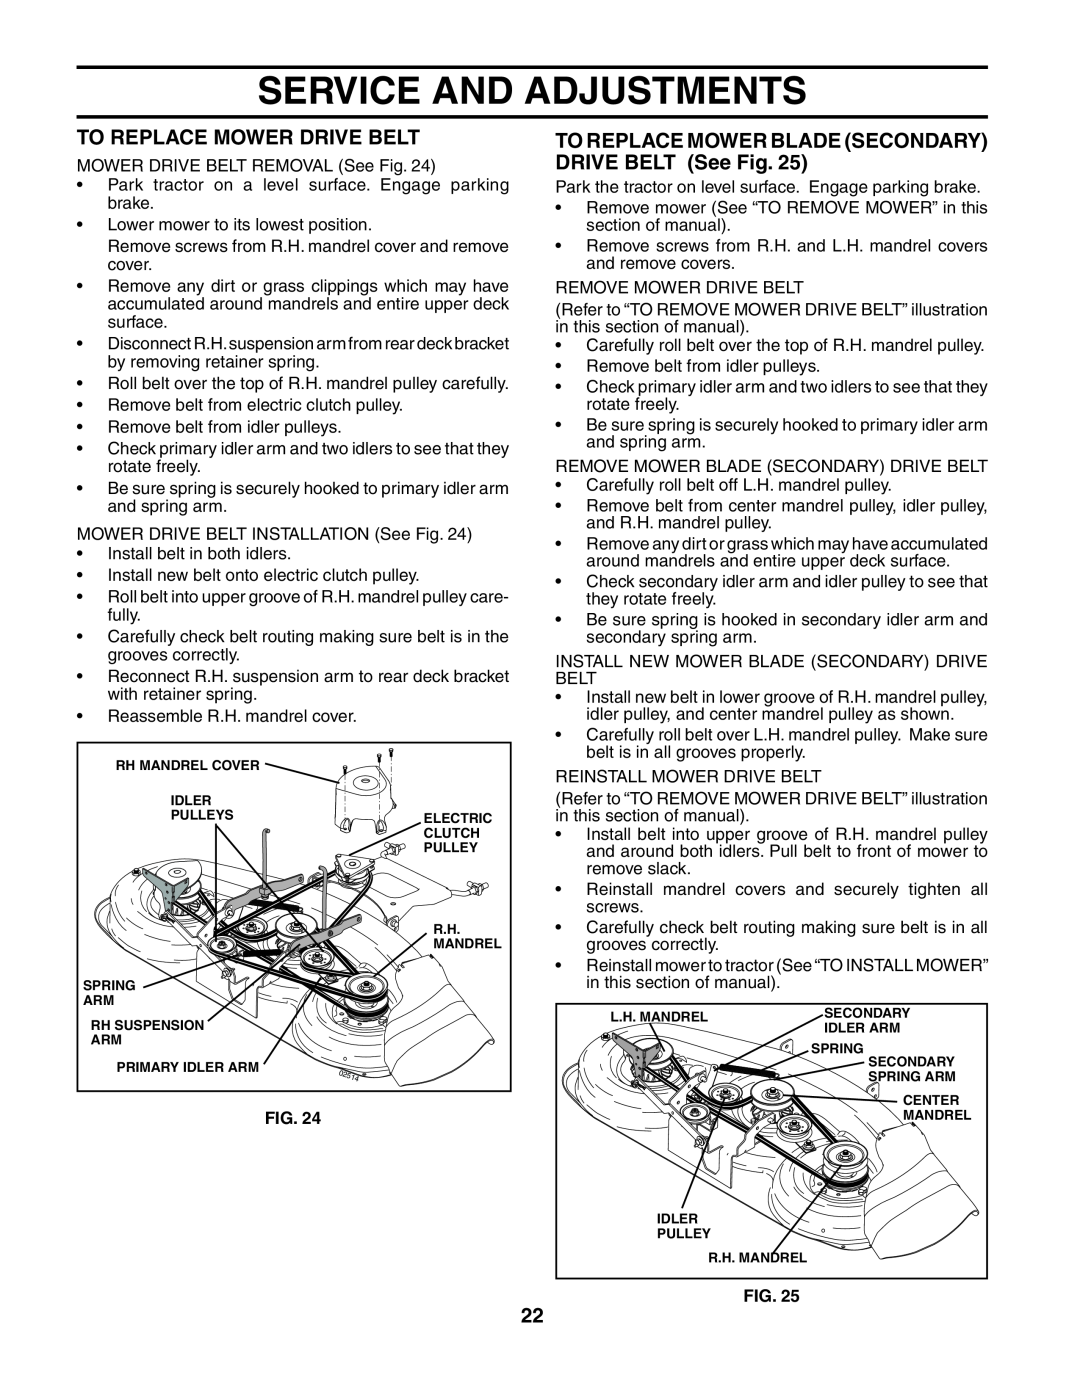 Husqvarna YTH2548 owner manual To Replace Mower Drive Belt, TO REPLACE MOWER BLADE SECONDARY DRIVE BELT See Fig 